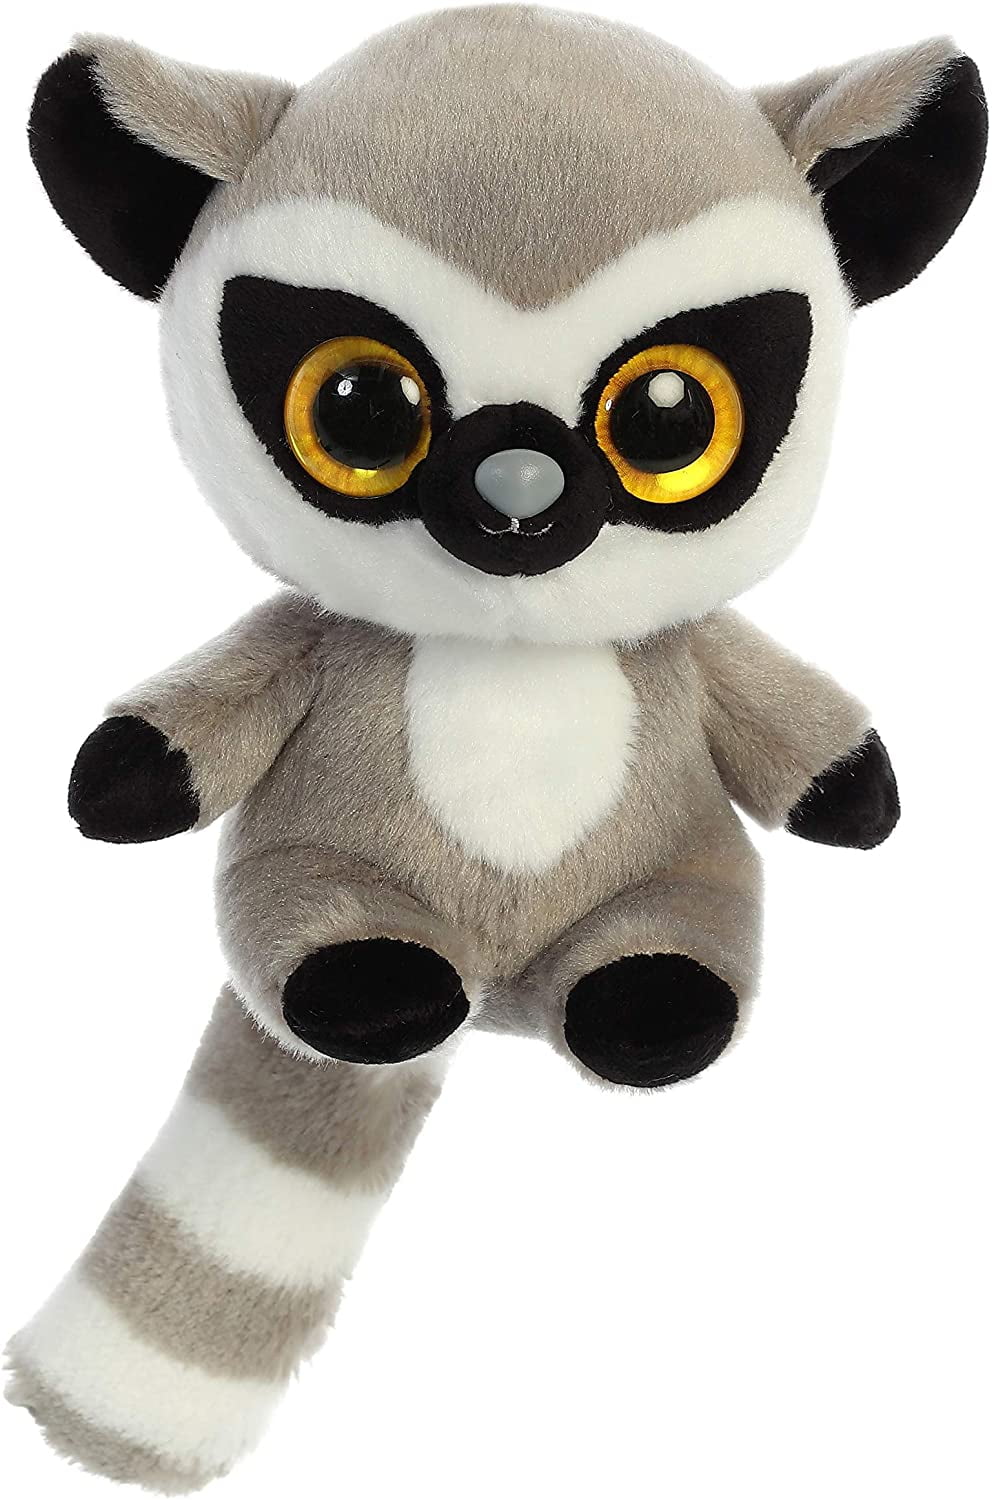 YooHoo Lemmee Lemur Cute Stuffed Animal 8 inches Collectible Soft Toy 